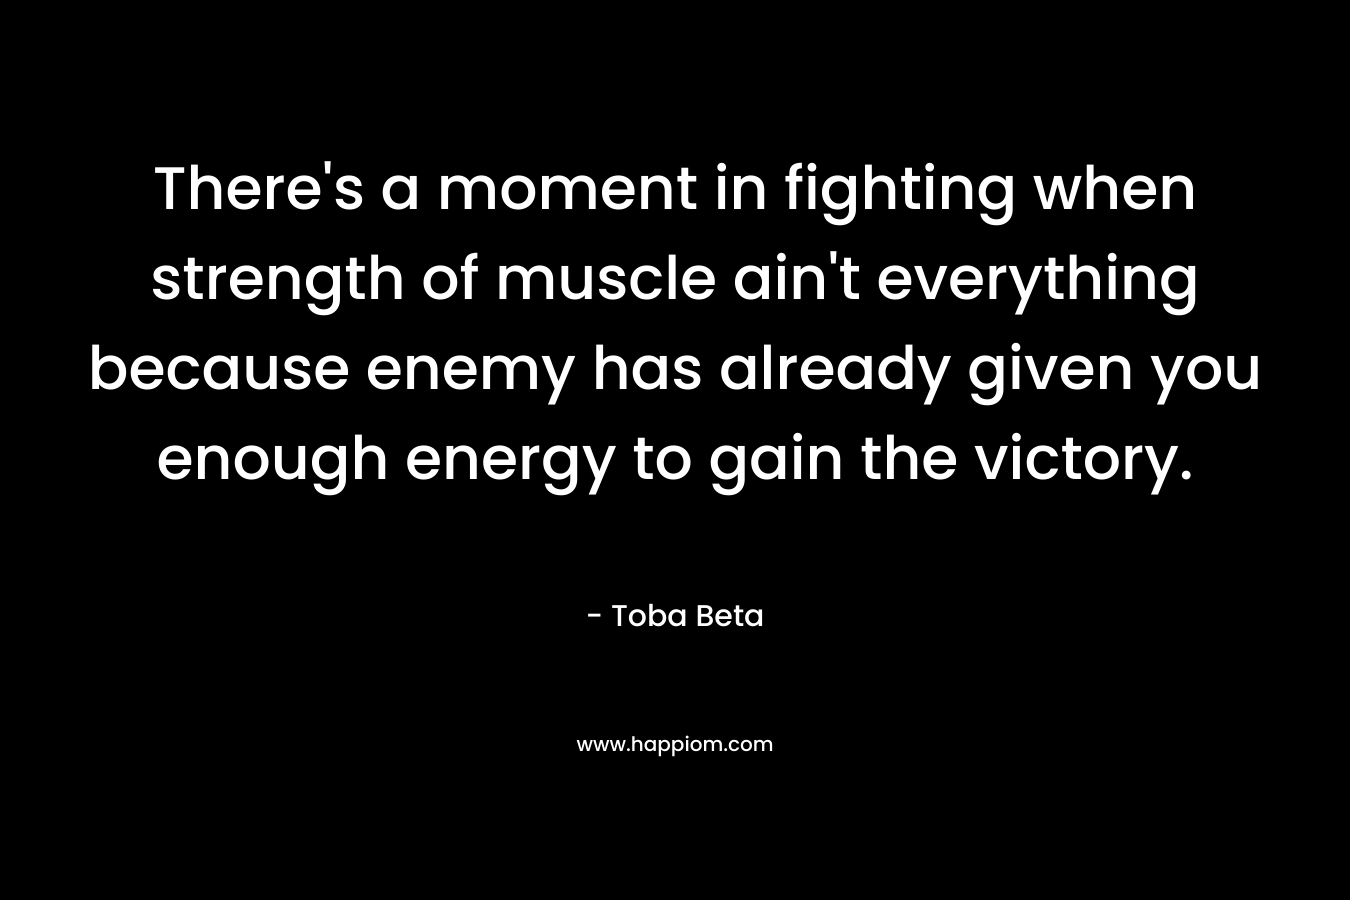 There’s a moment in fighting when strength of muscle ain’t everything because enemy has already given you enough energy to gain the victory. – Toba Beta